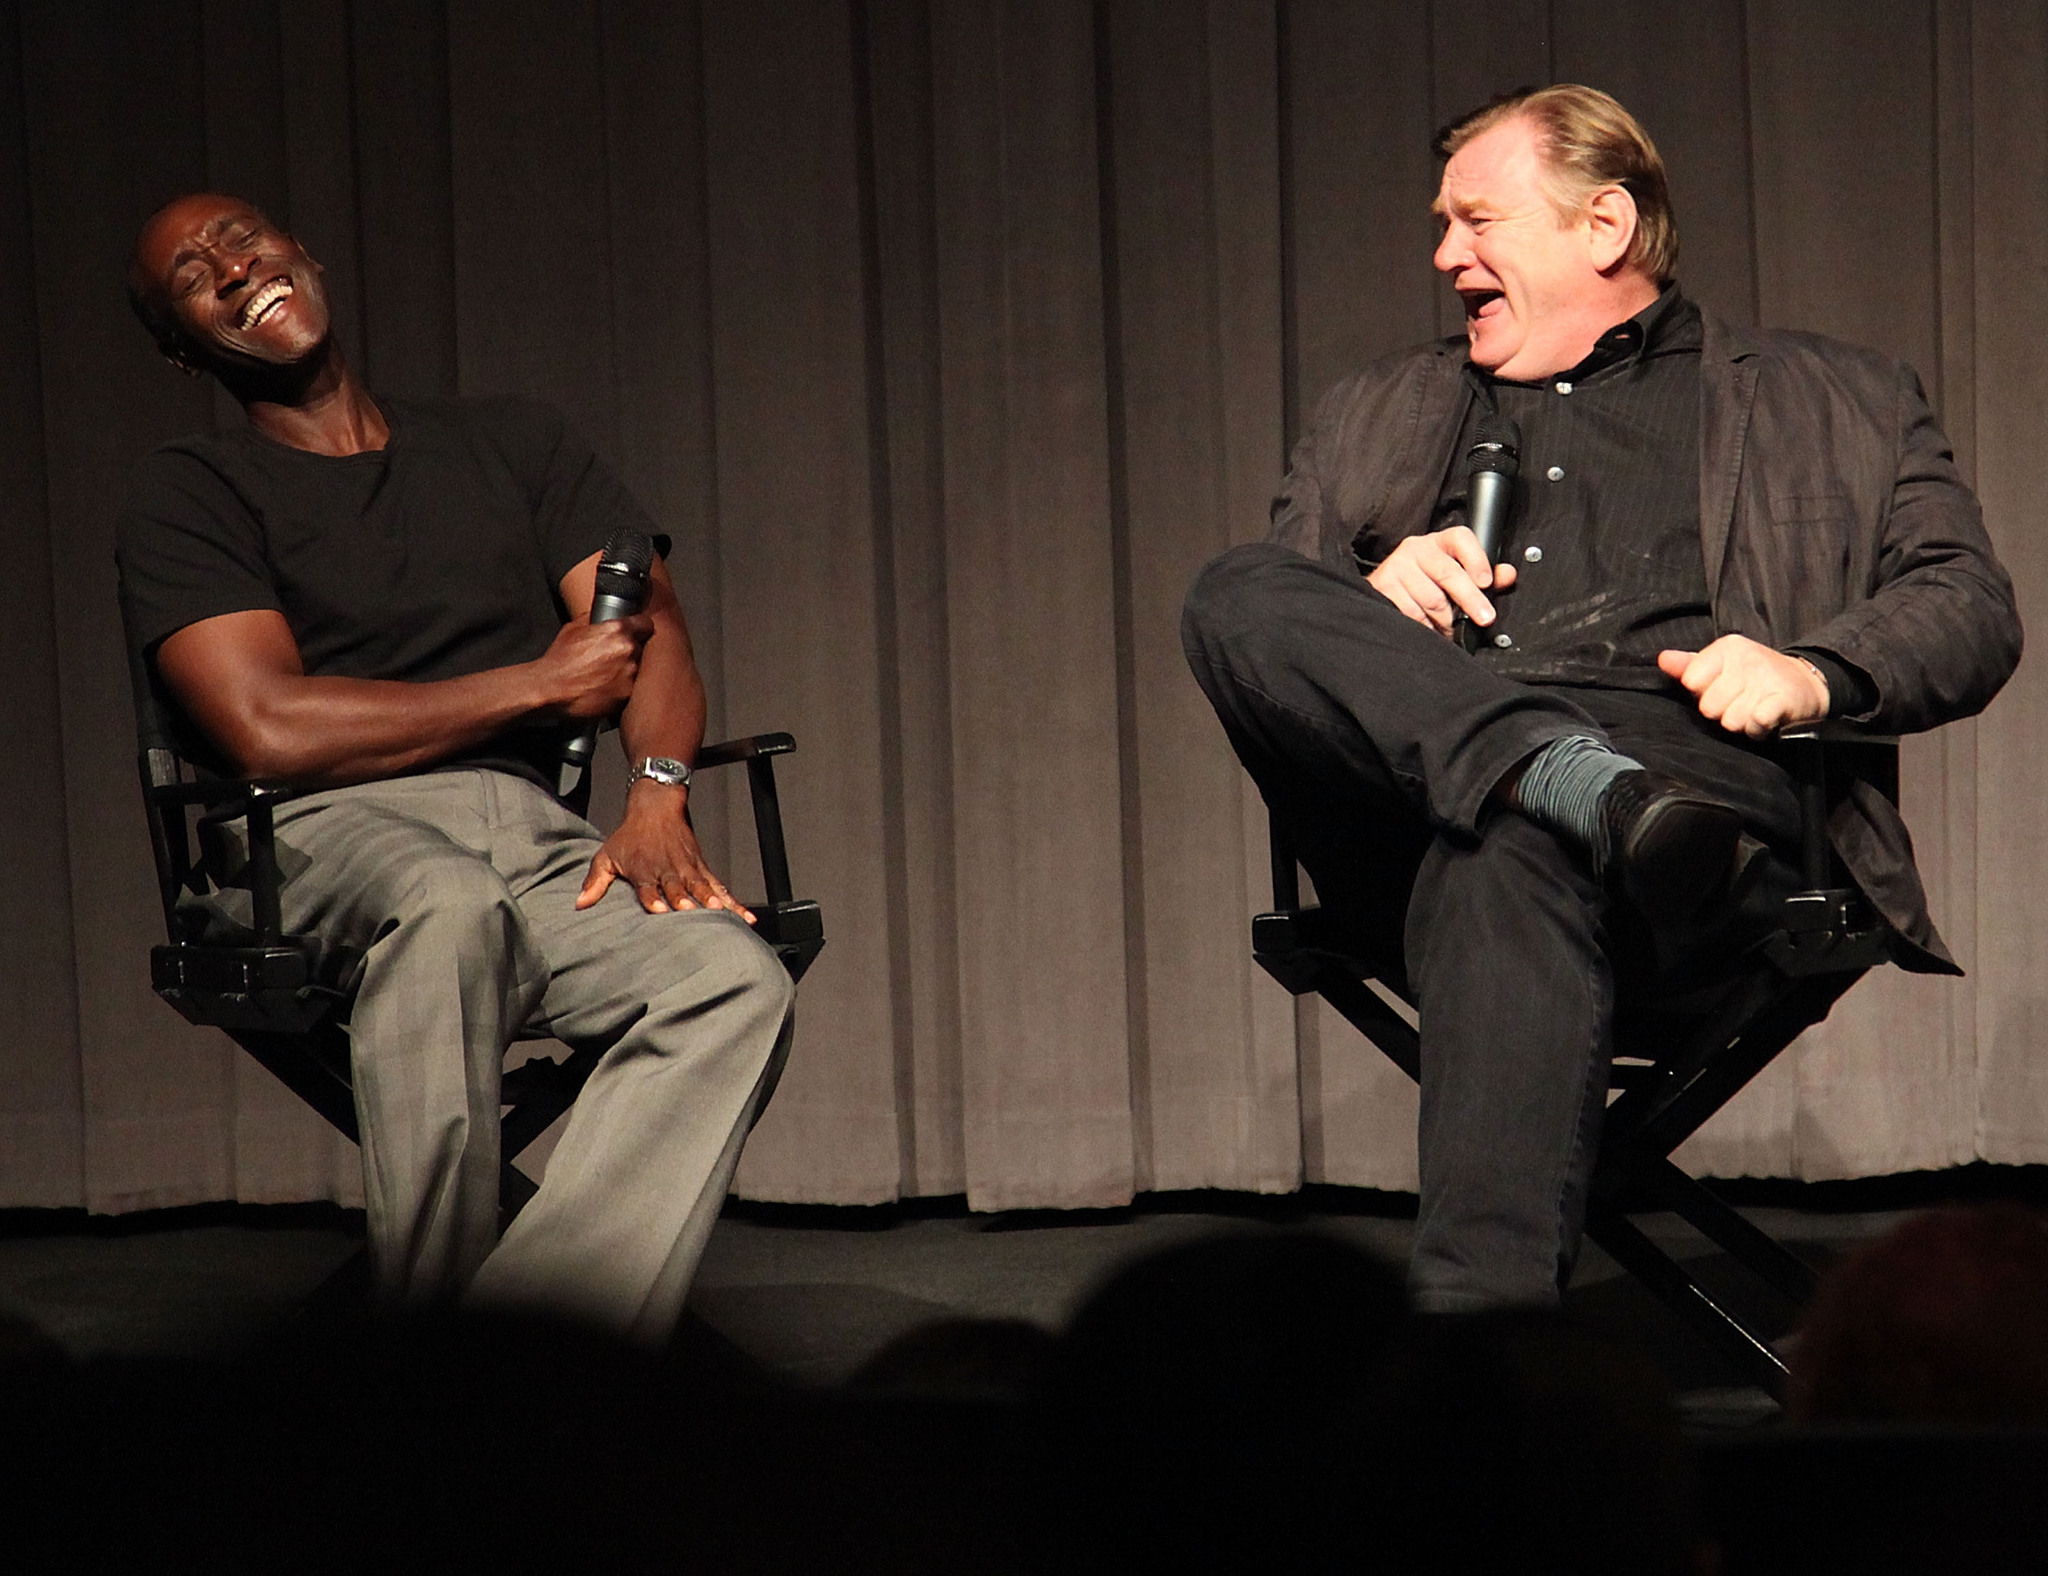 Don Cheadle and Brendan Gleeson at event of The Guard (2011)